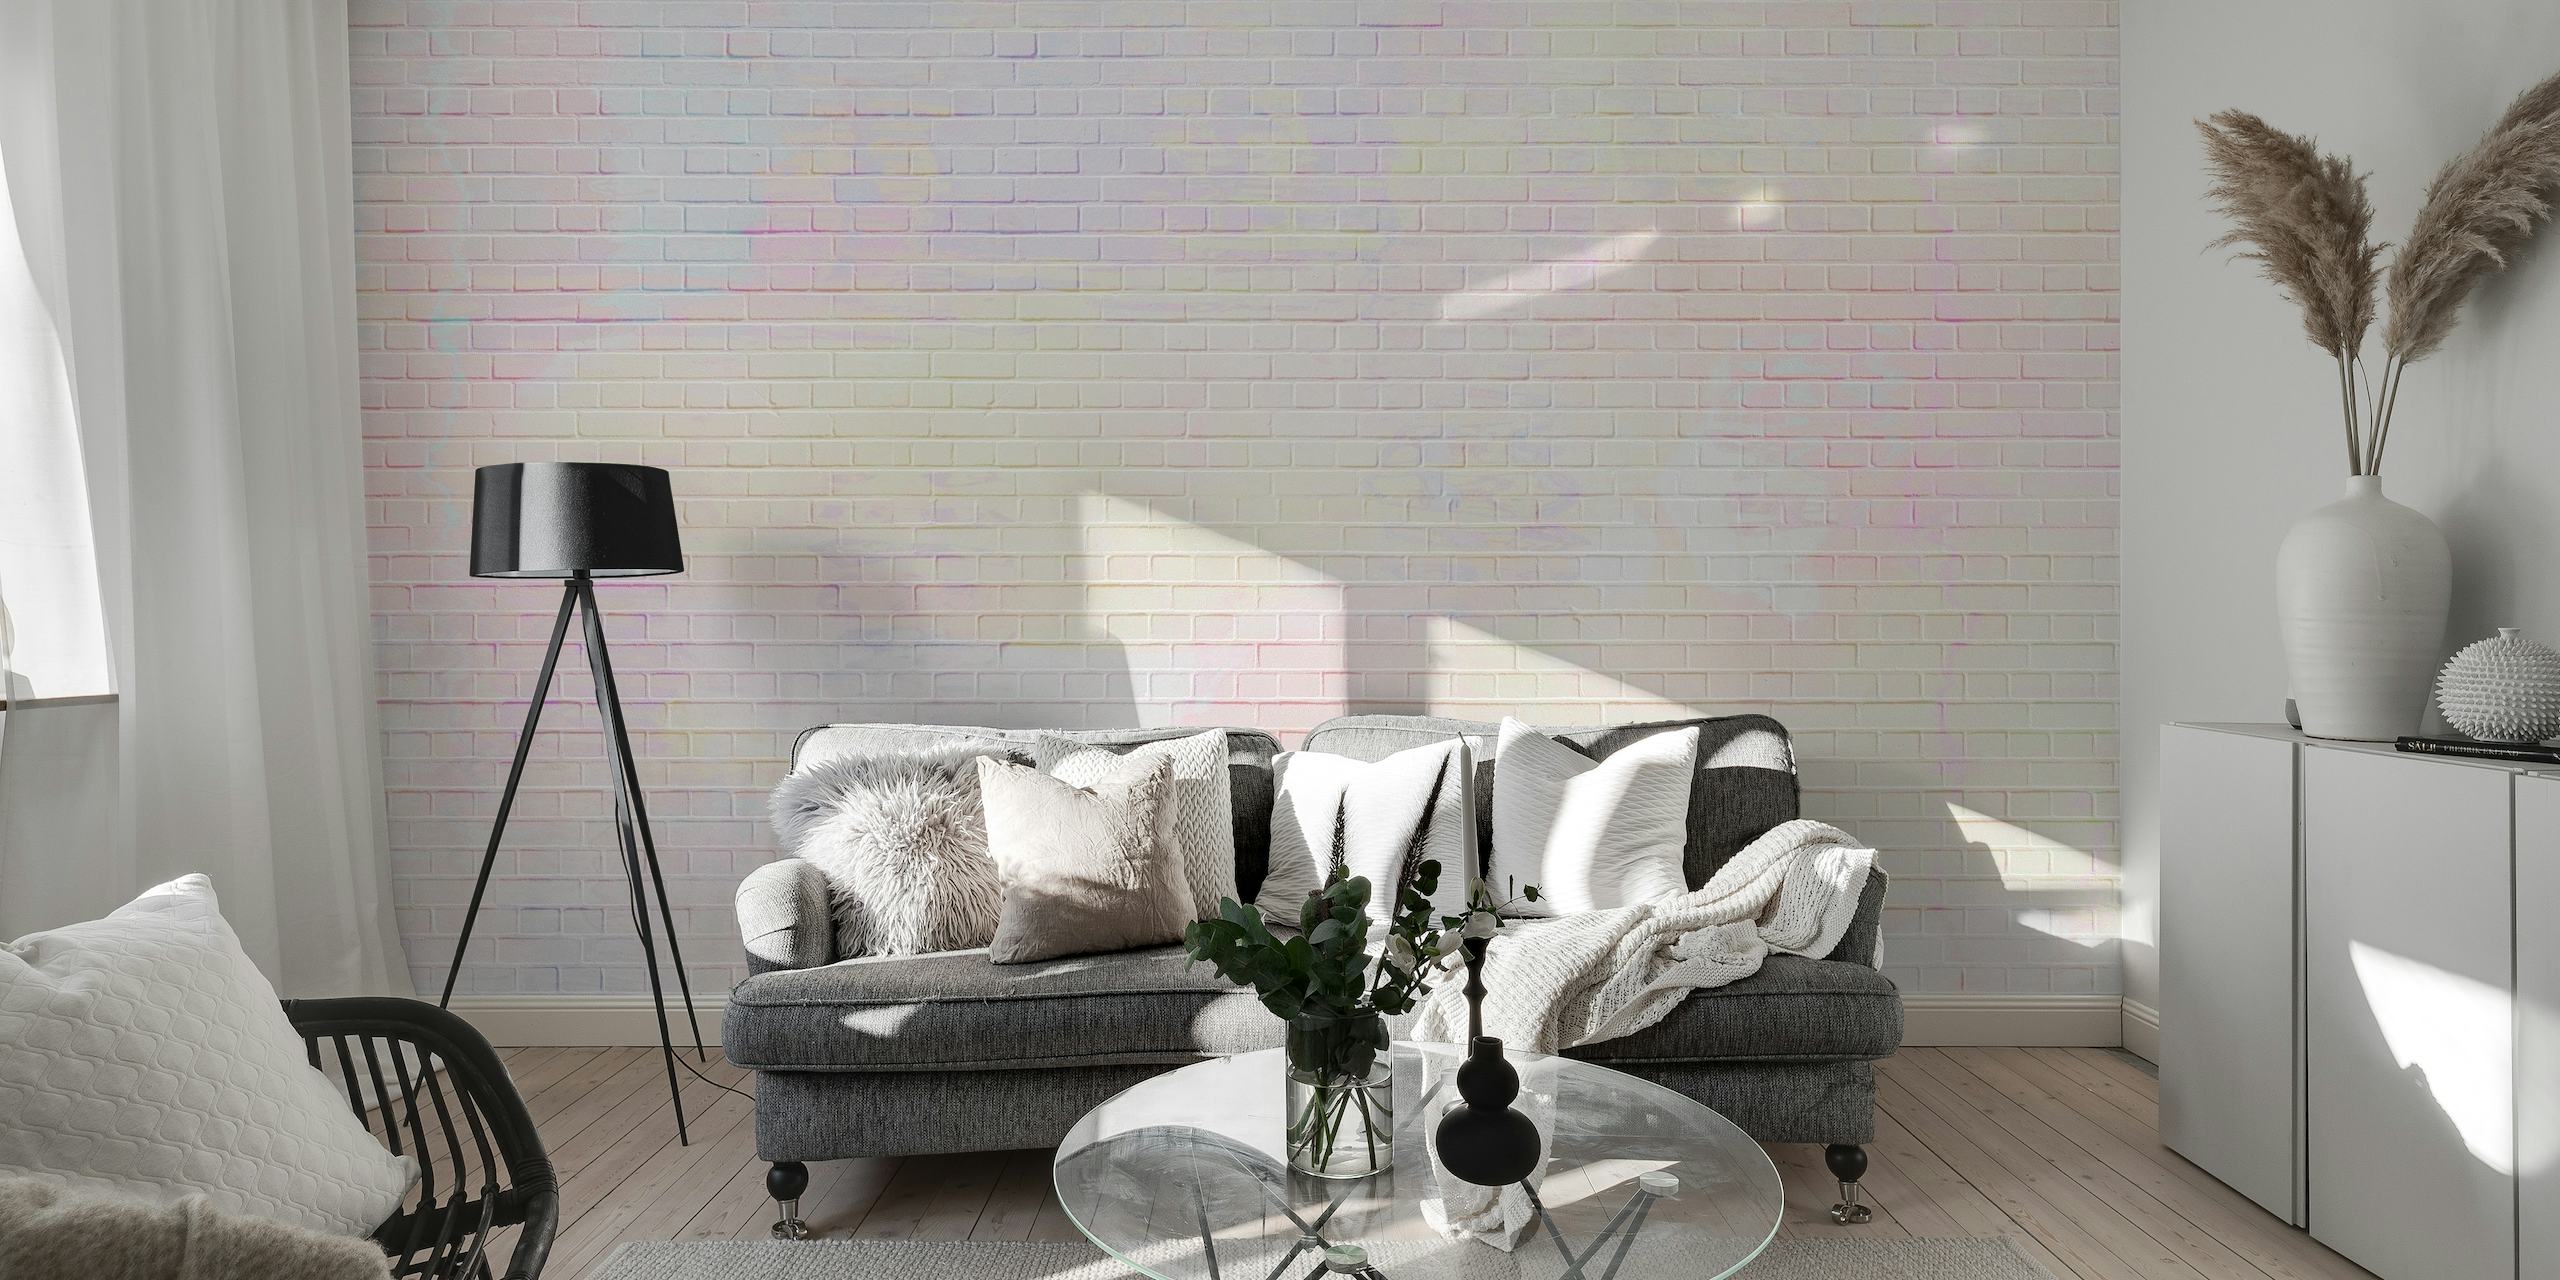 Pastel colors painted over a brick wall texture wall mural